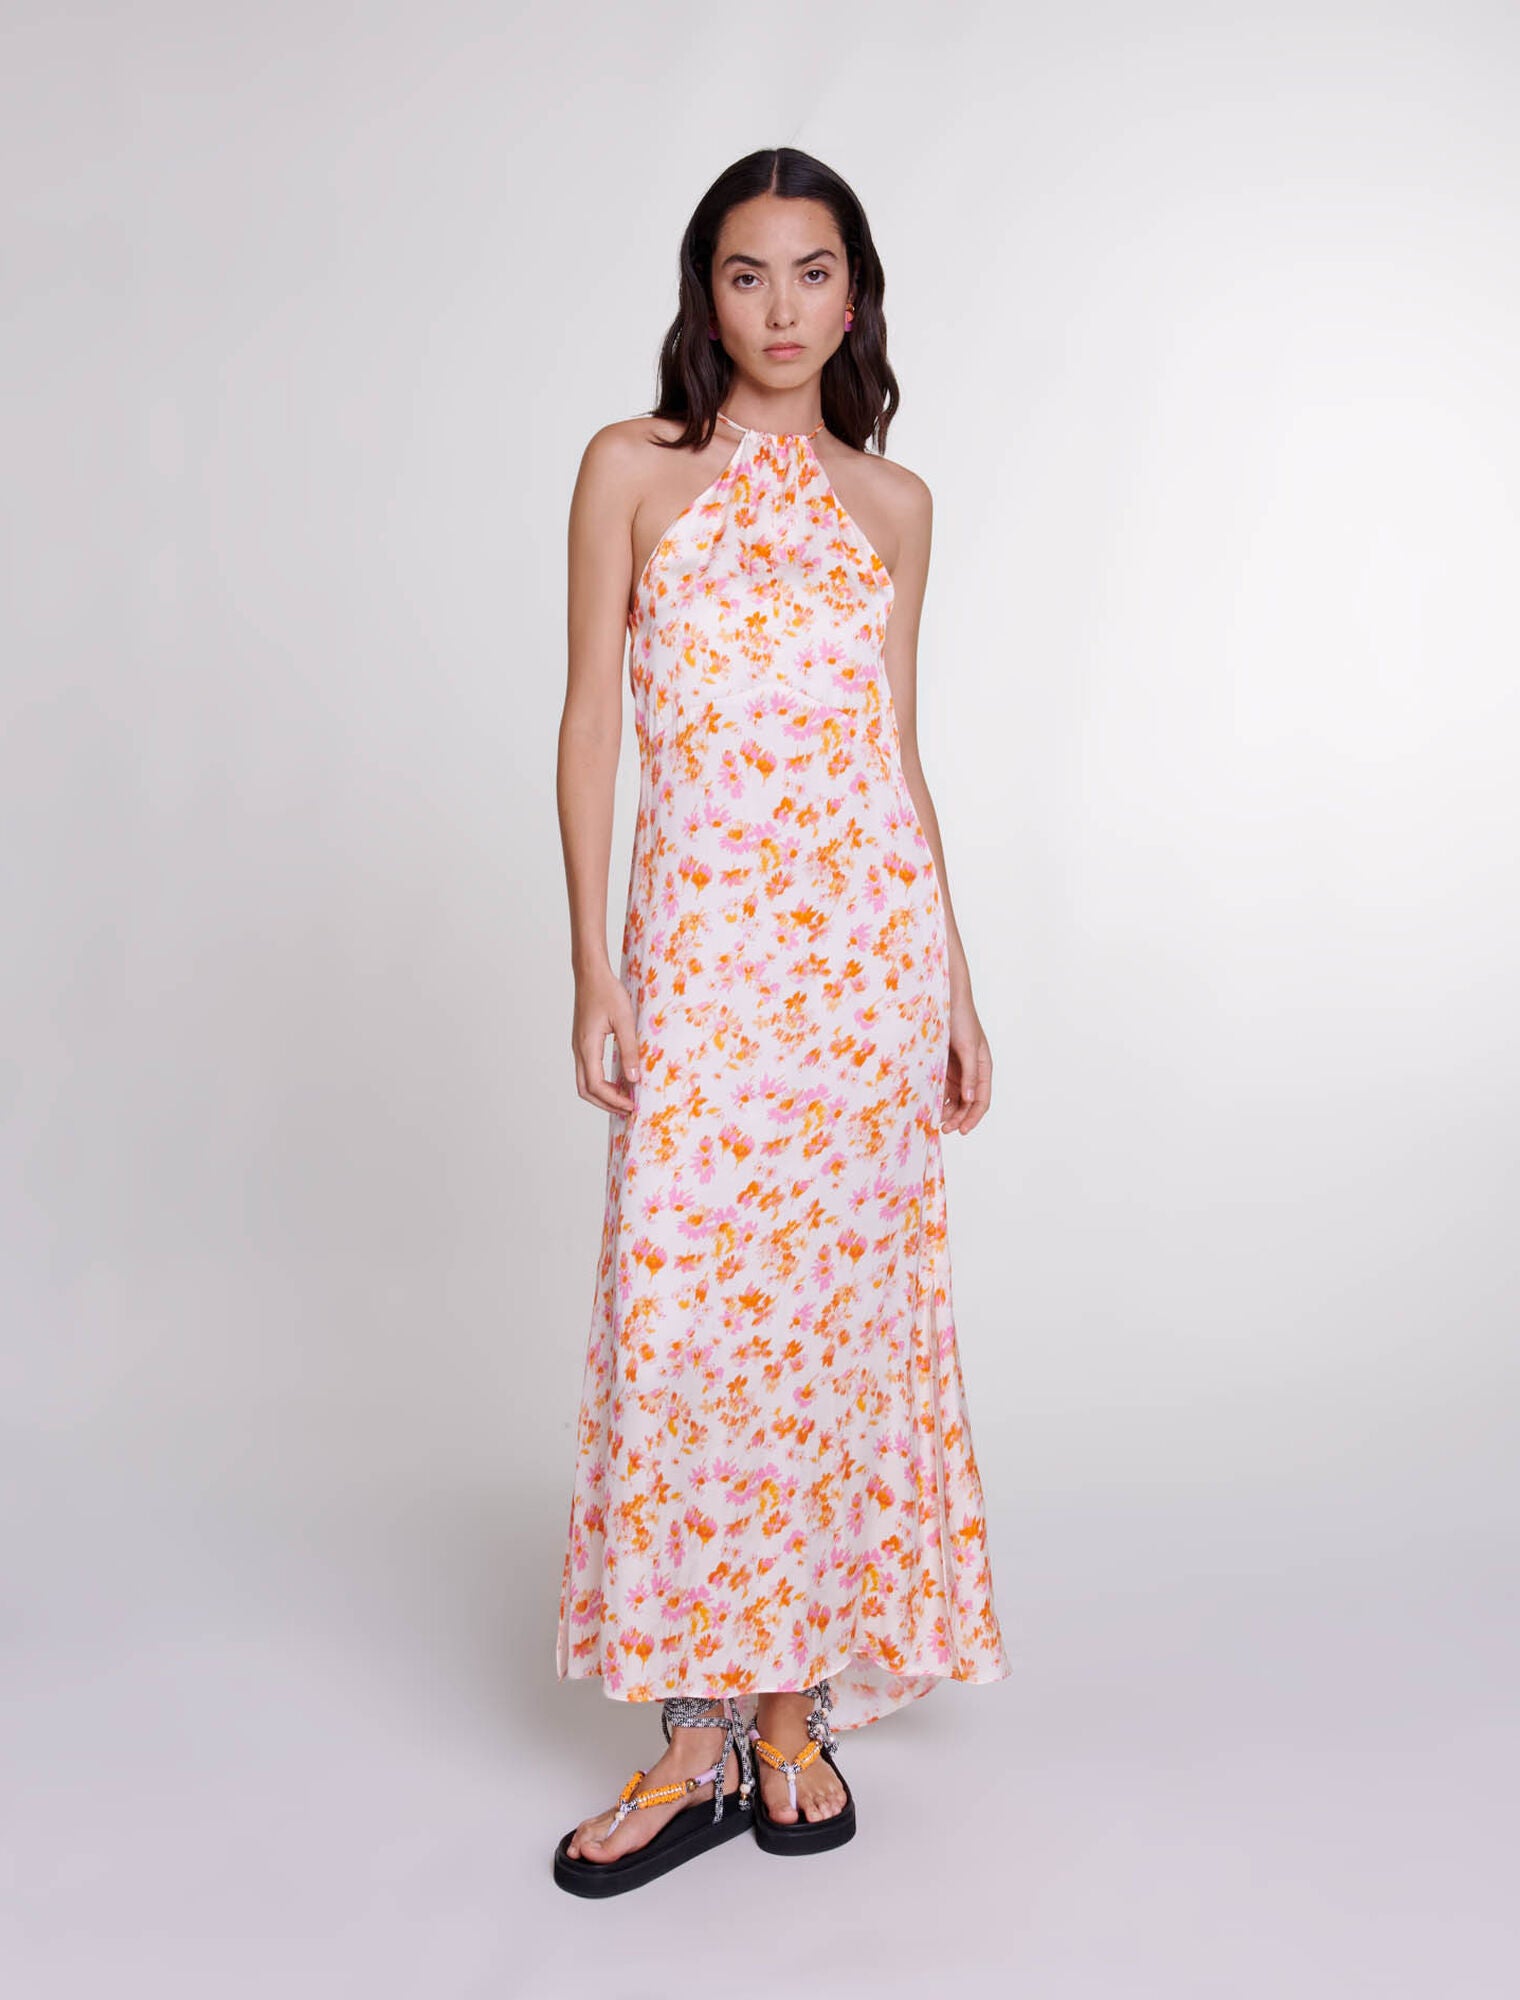 Sping Orange Flower Print featured Floral satin-effect maxi dress